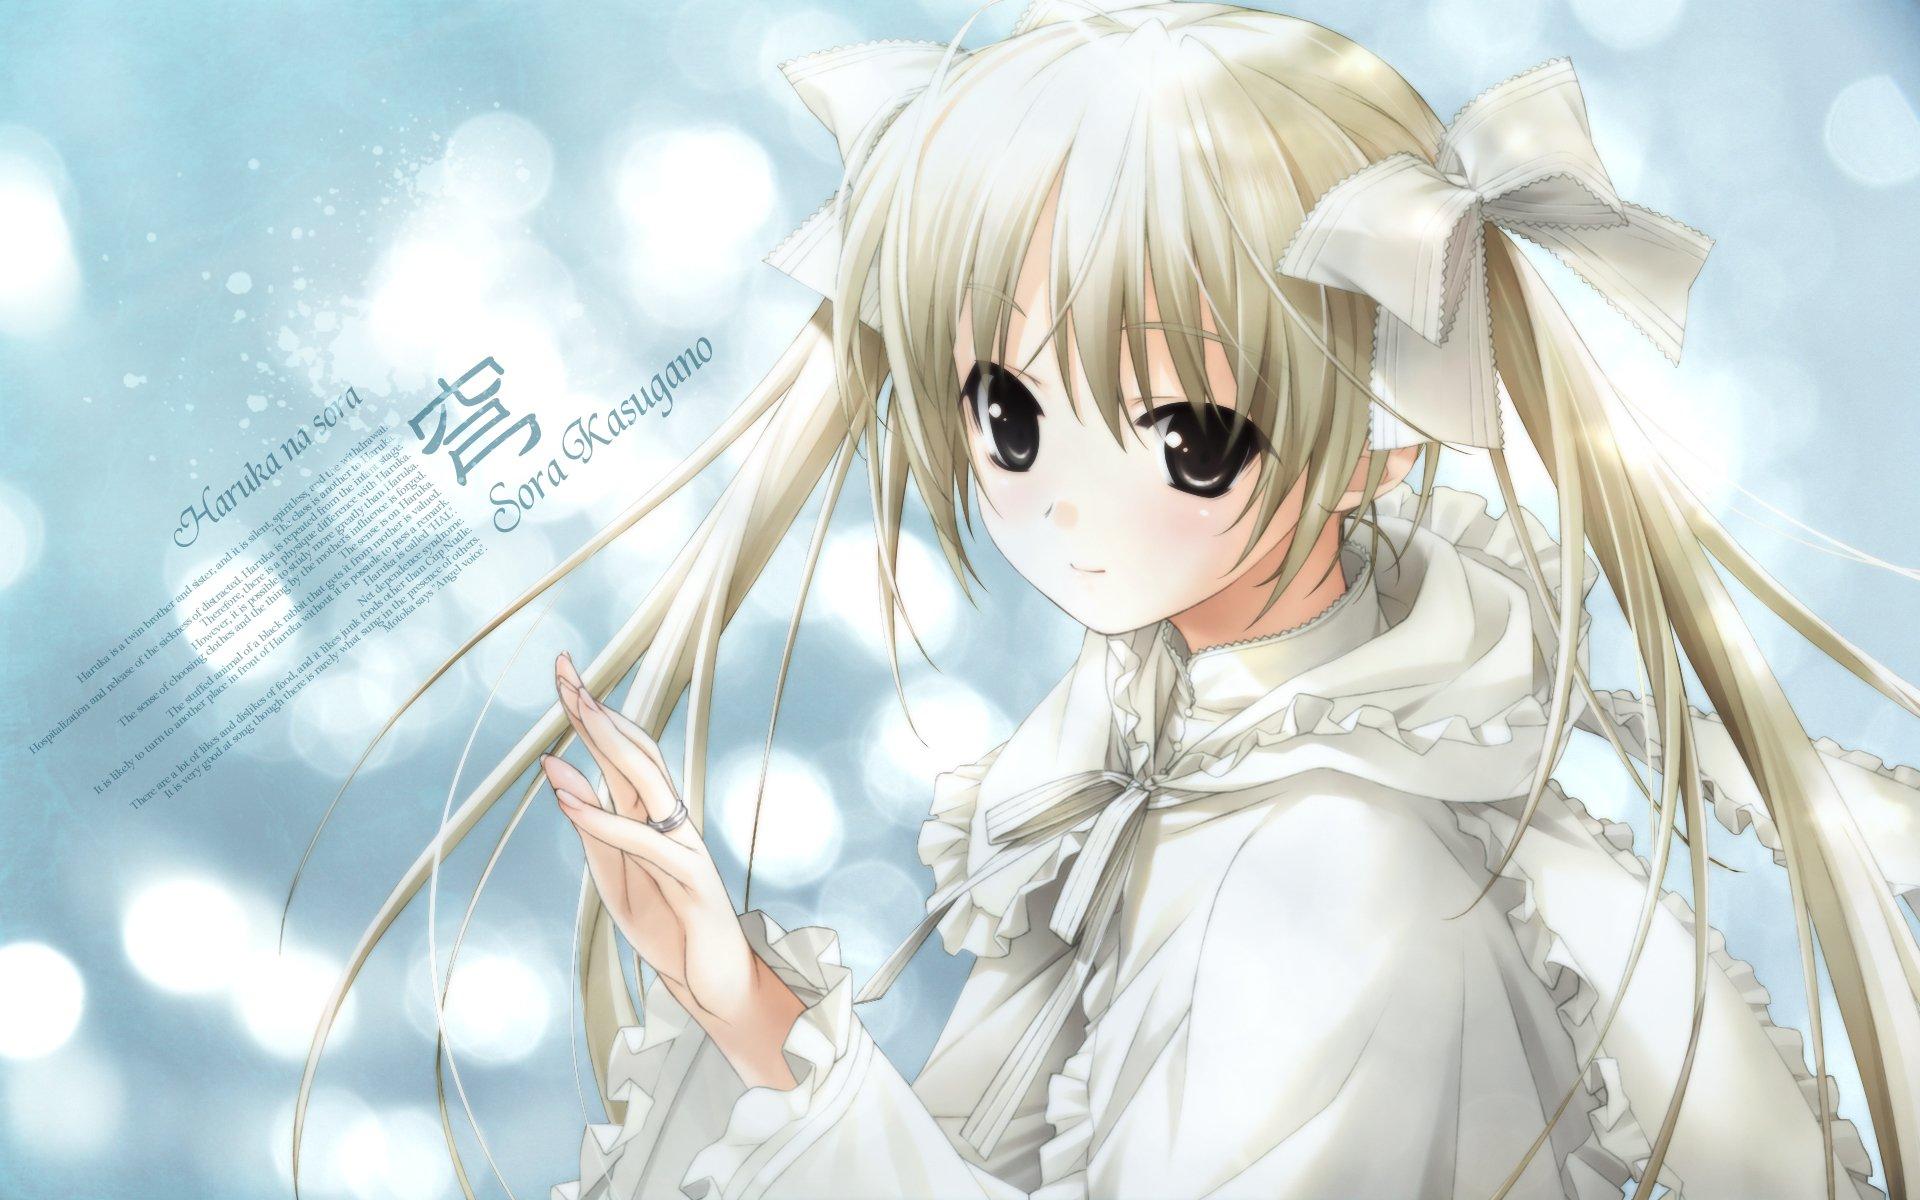 40 Hot Pictures Of Kazuha Migiwa from Yosuga no Sora Which Will Make You Fall For Her | Best Of Comic Books